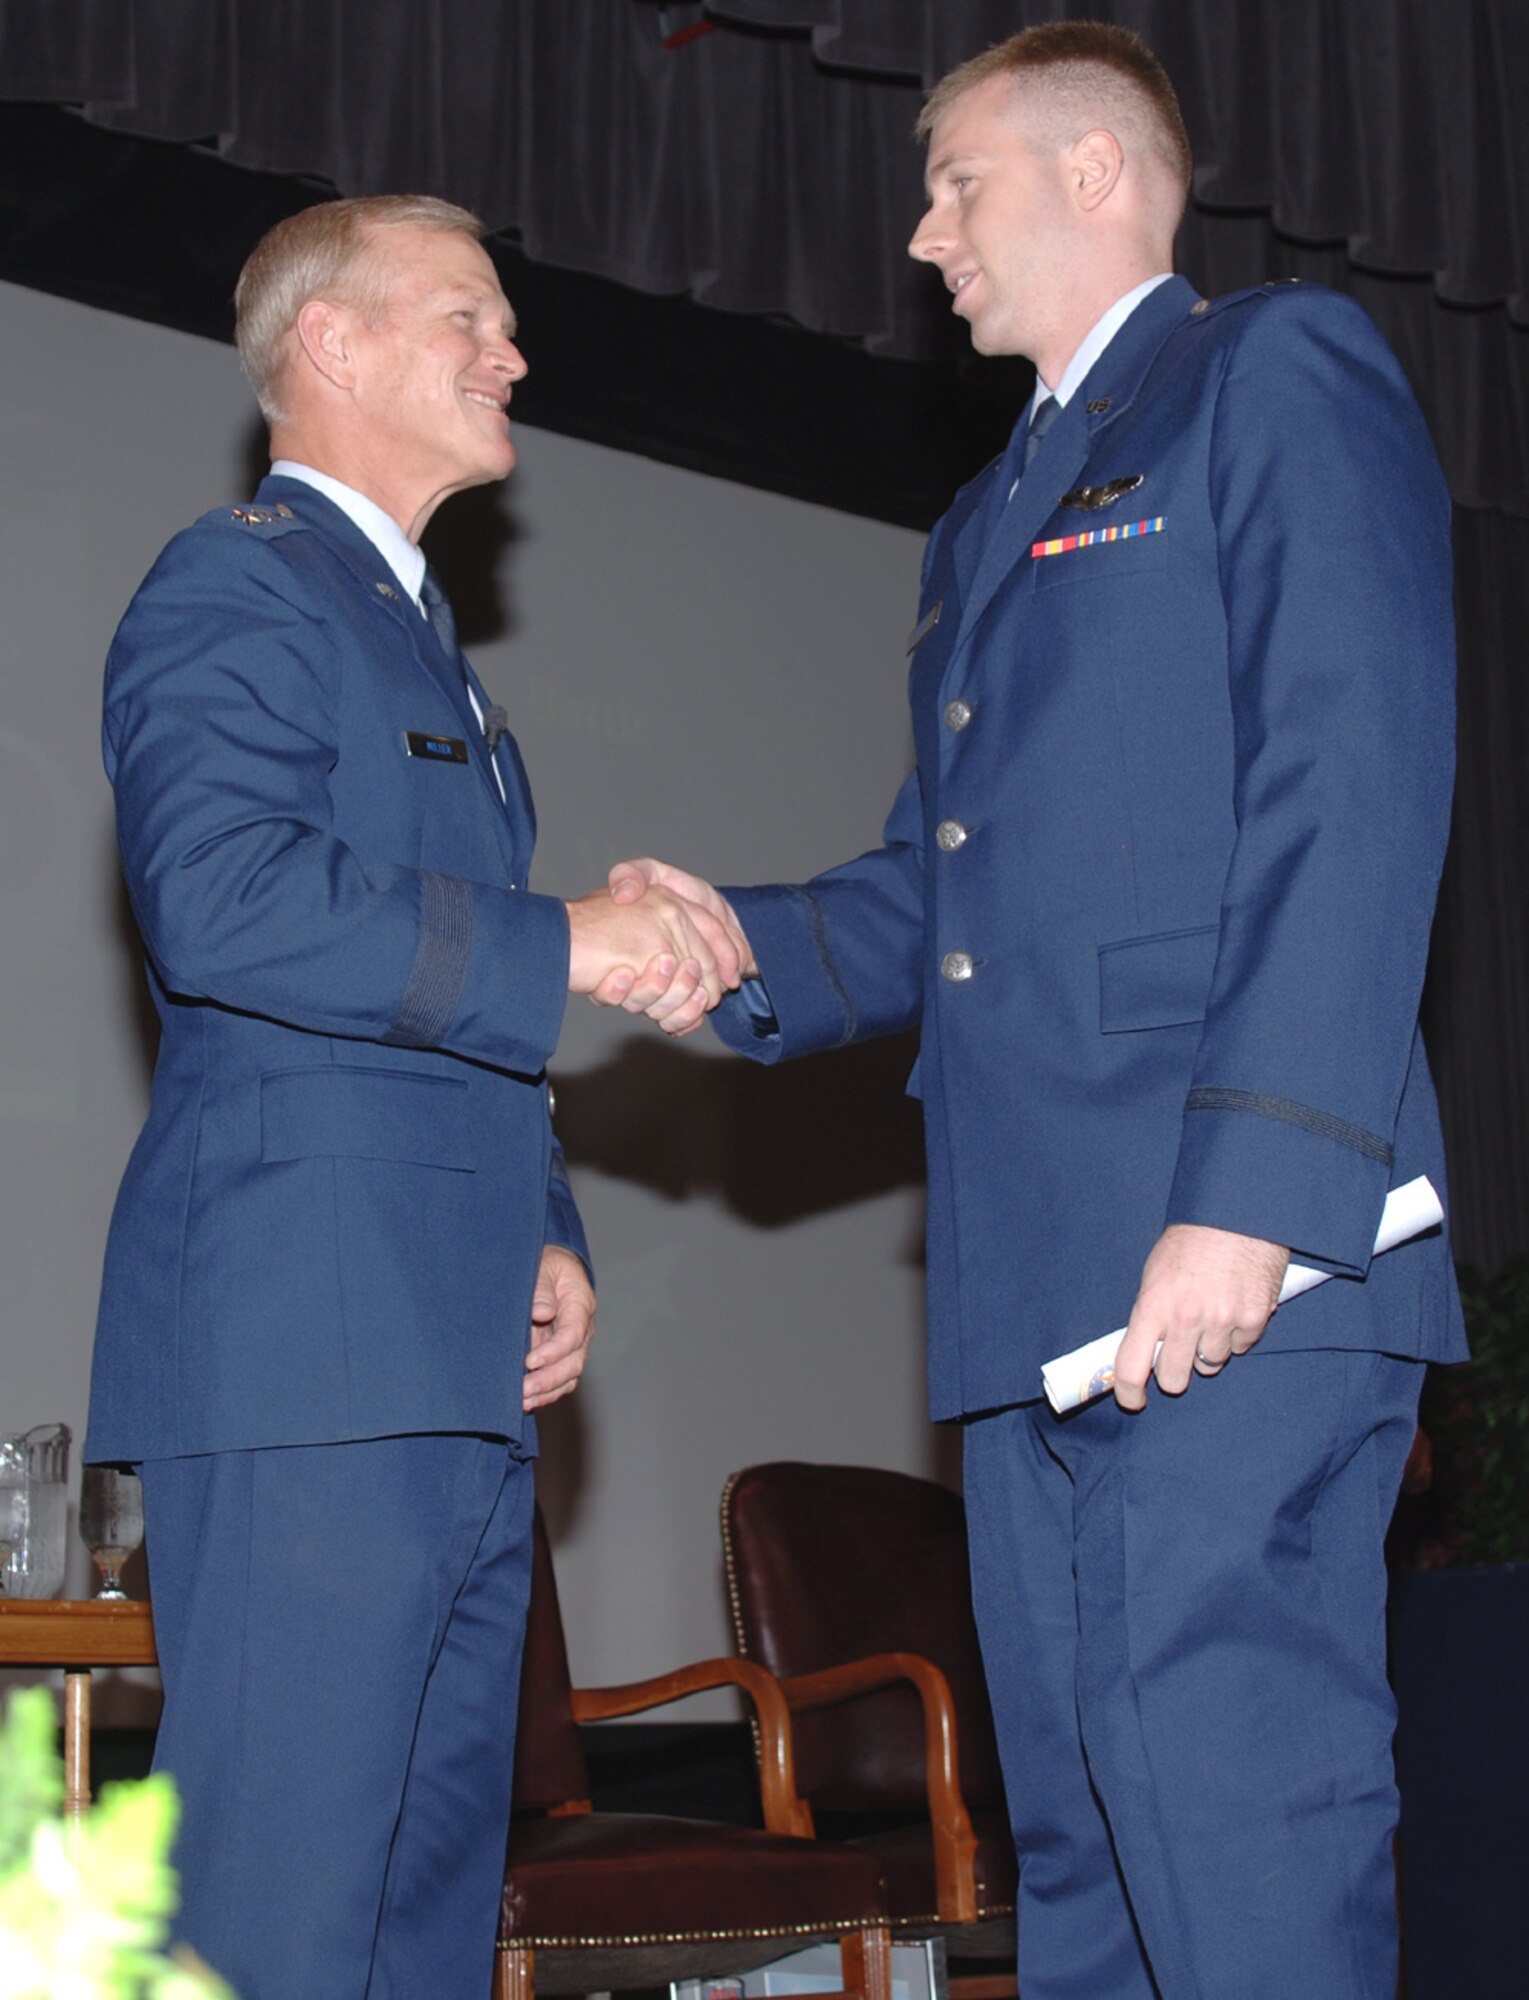 Major Gen. Steve Miller, Commandant of the Air War College, Maxwell AFB, Ala., congratulates a graduate of Specialized Undergraduate Pilot Training Class 07-12 during his visit to Columbus AFB July 27. (U.S. Air Force Photo by Airman 1st Class Danielle Powell)